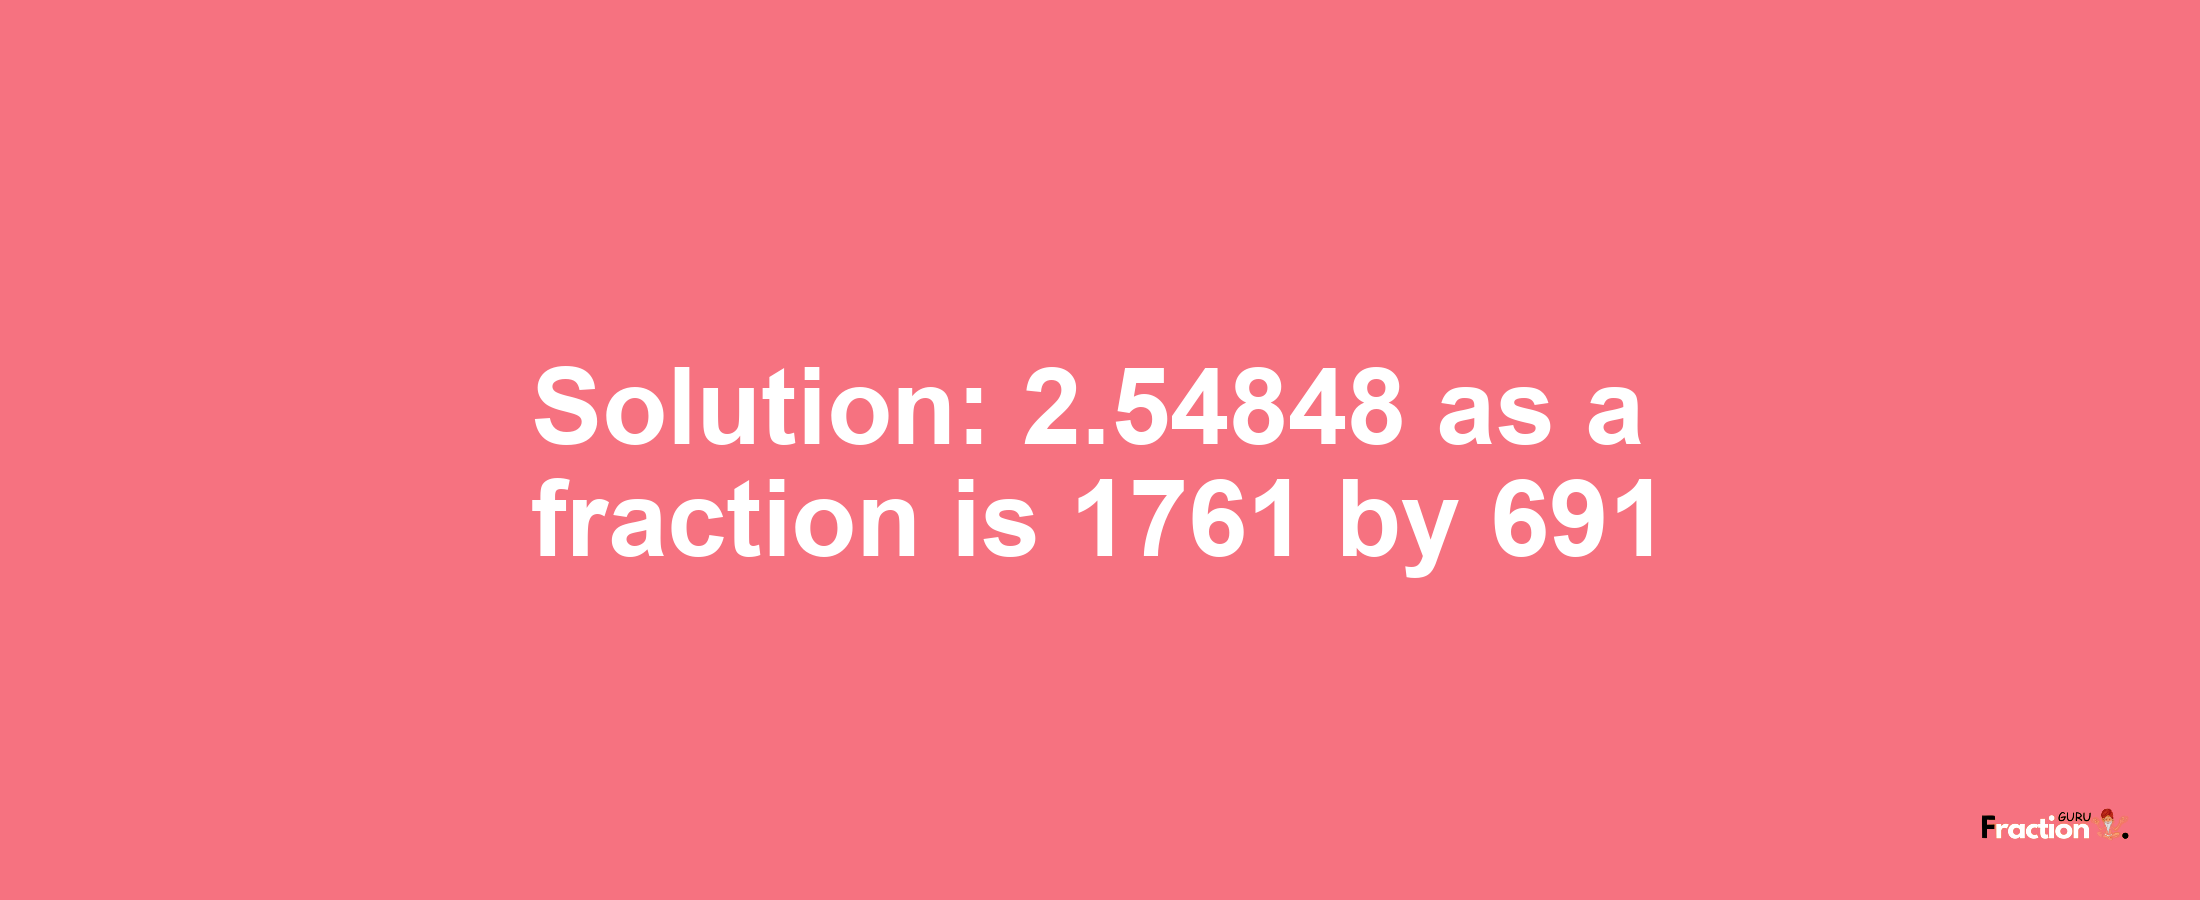 Solution:2.54848 as a fraction is 1761/691